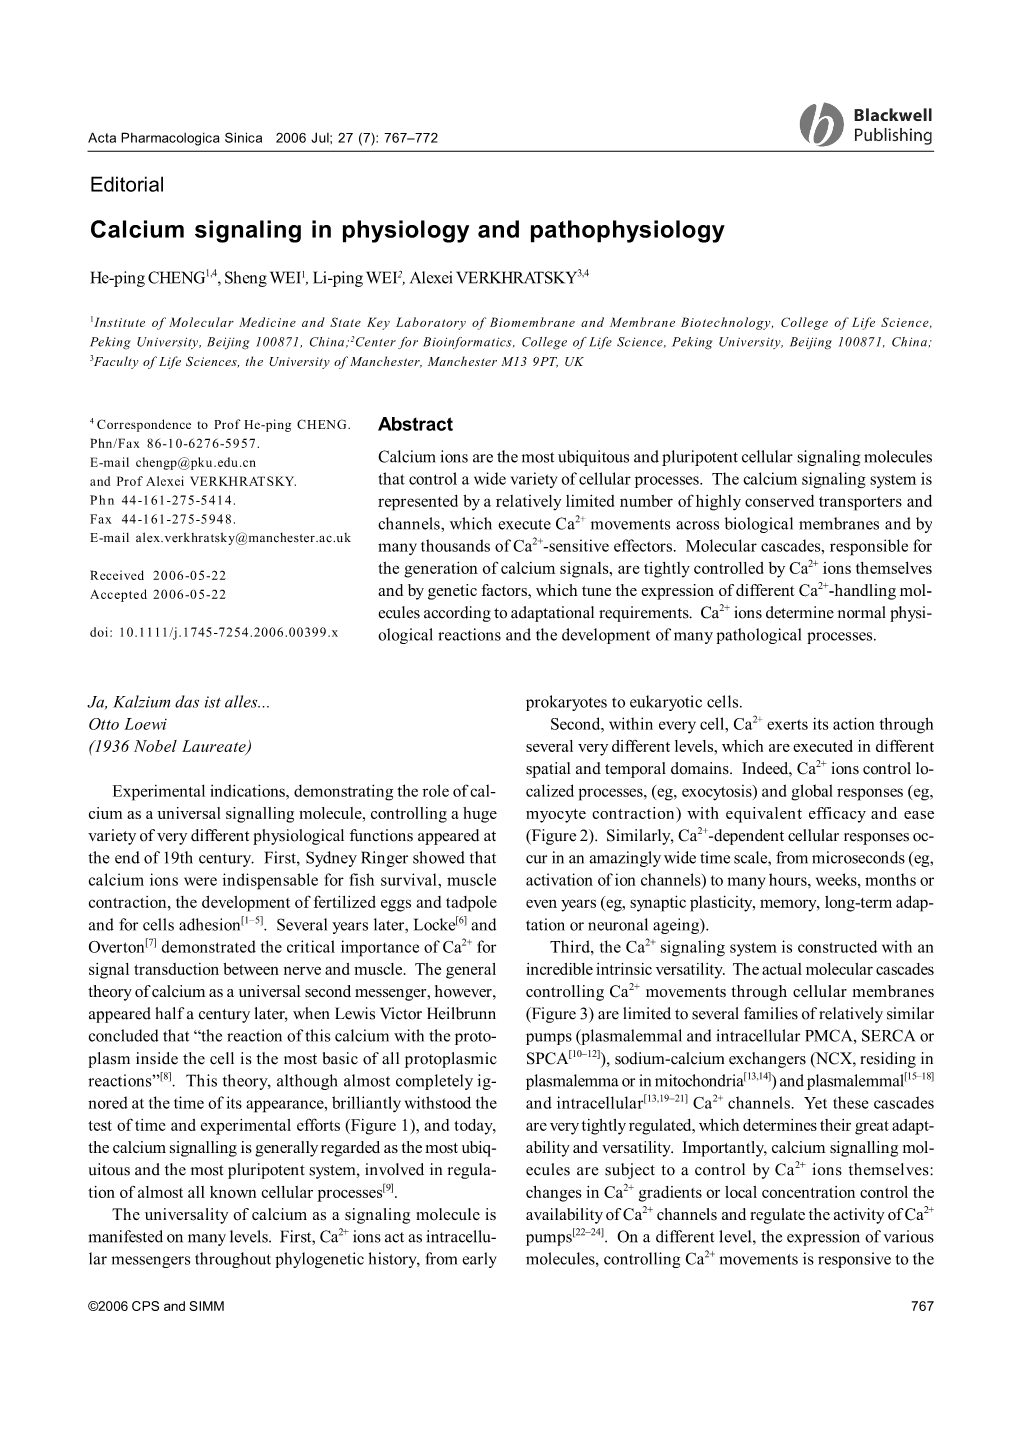 Calcium Signaling in Physiology and Pathophysiology